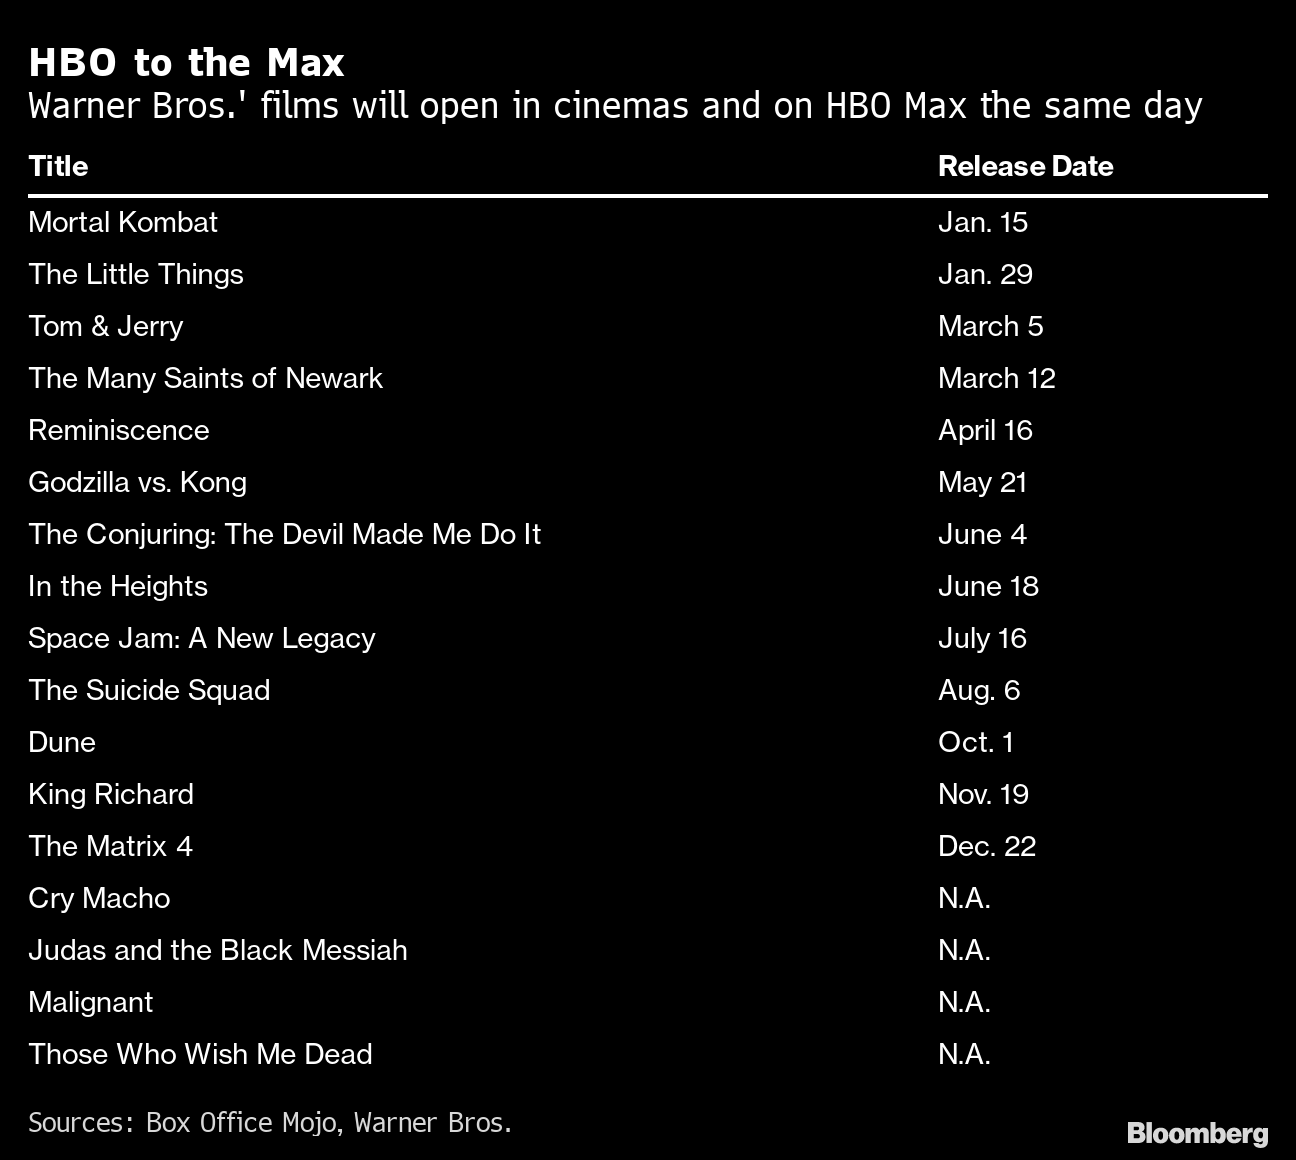 Warner Bros.’ 2021 Films to Hit Both HBO Max and Theaters Bloomberg